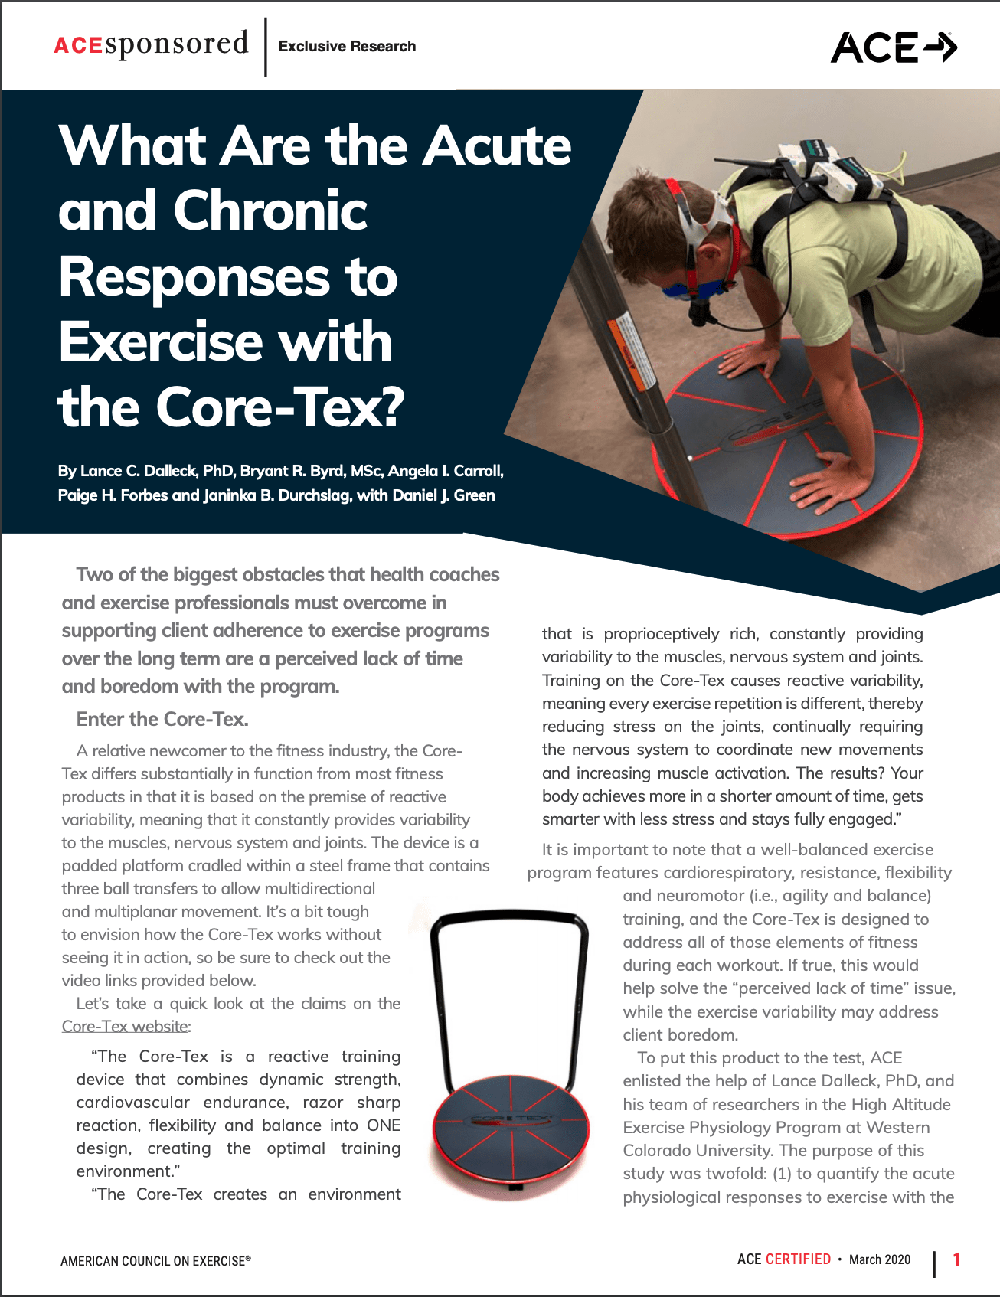 American Council on Exercise article on acute and chronic responses to exercise with the Core-Tex